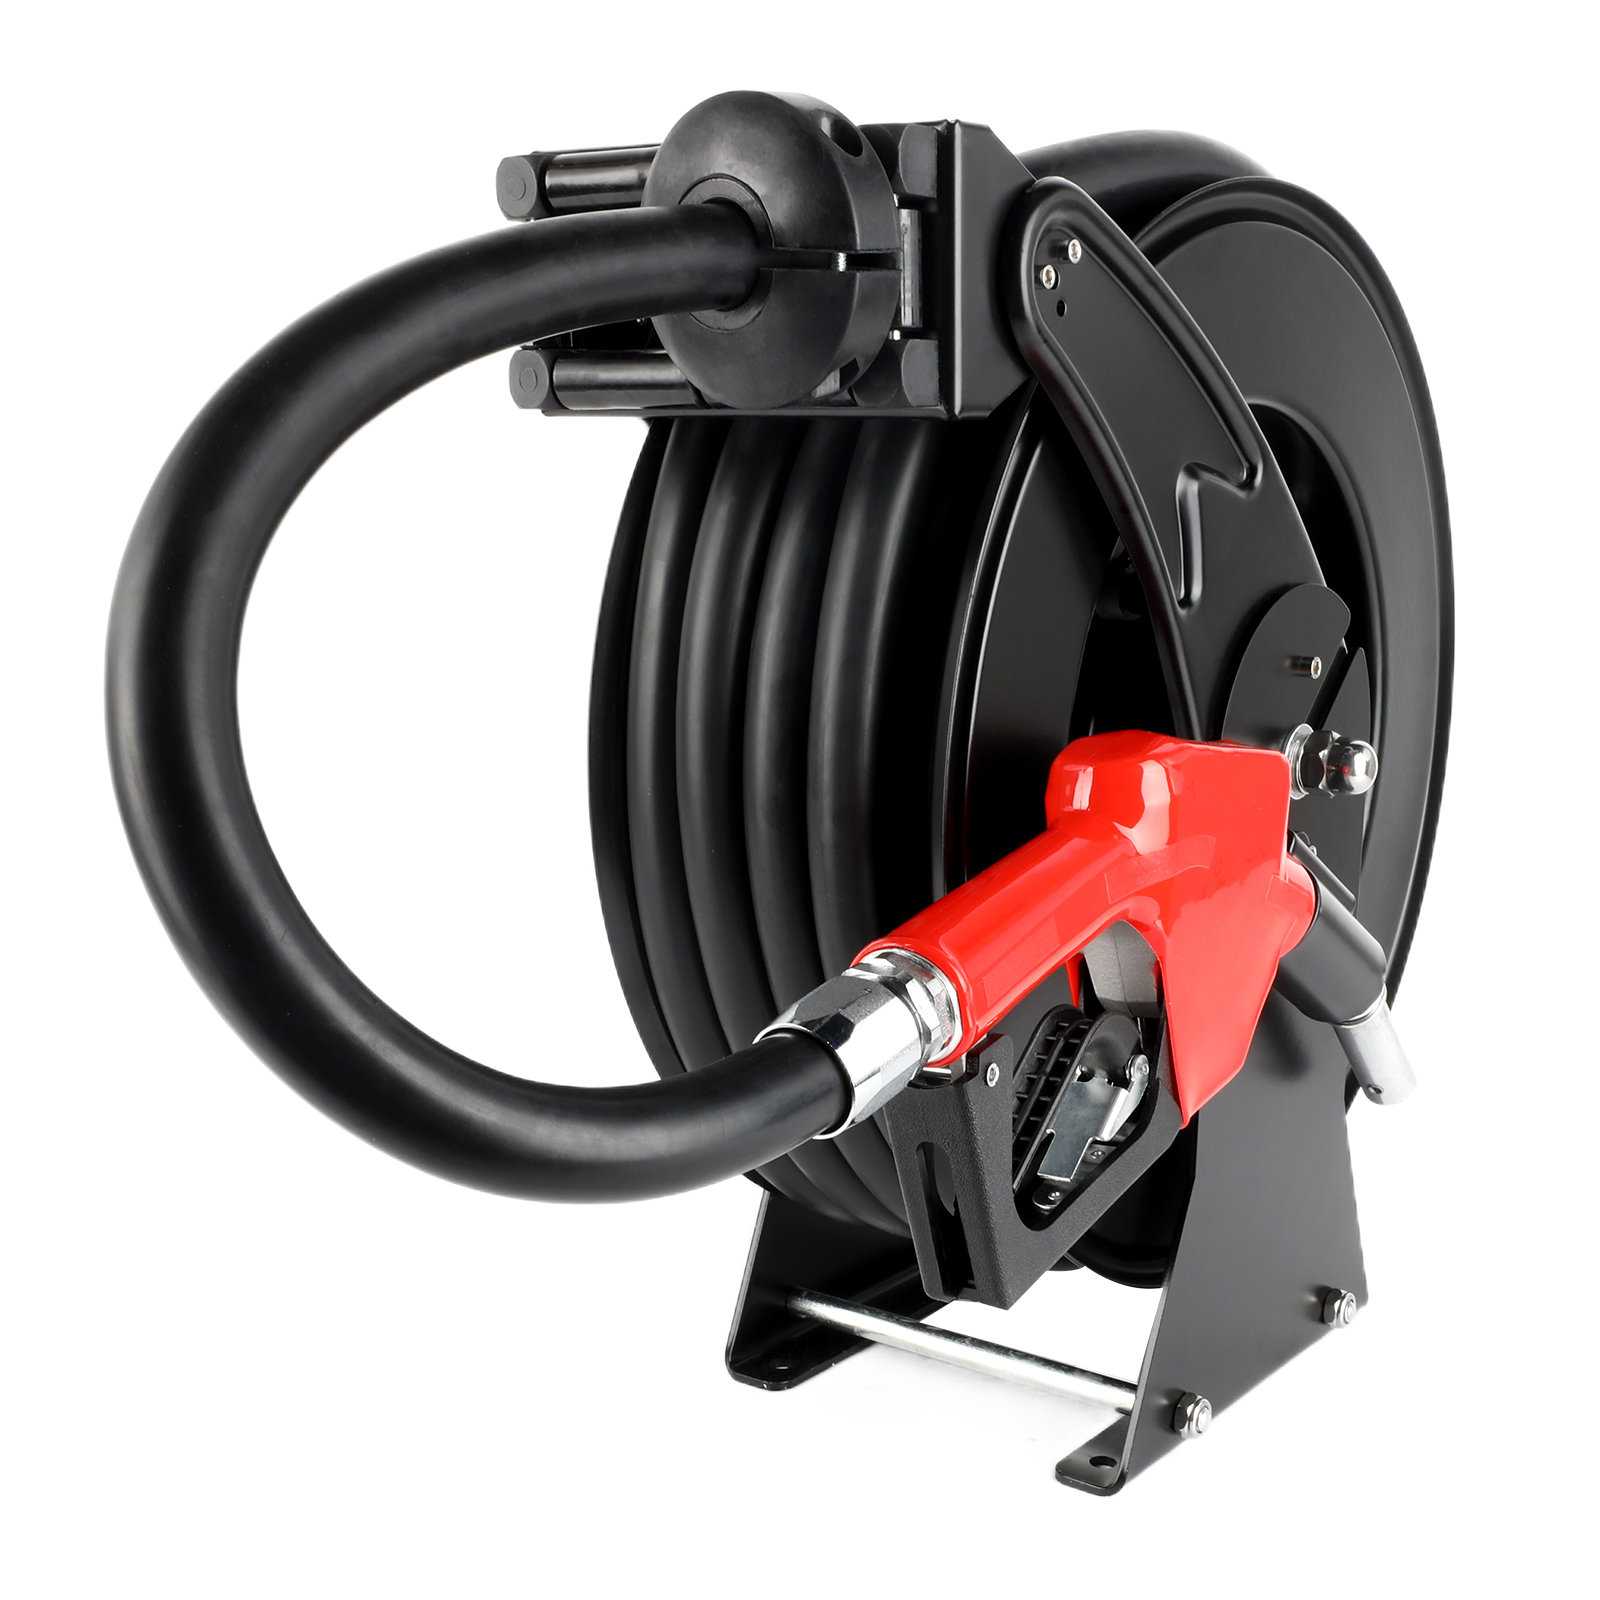 Domccy® Fuel Hose Reel Retractable with Fueling Nozzle 3/4 x 50' Spring  Driven Diesel Hose Reel 300 PSI - Wayfair Canada